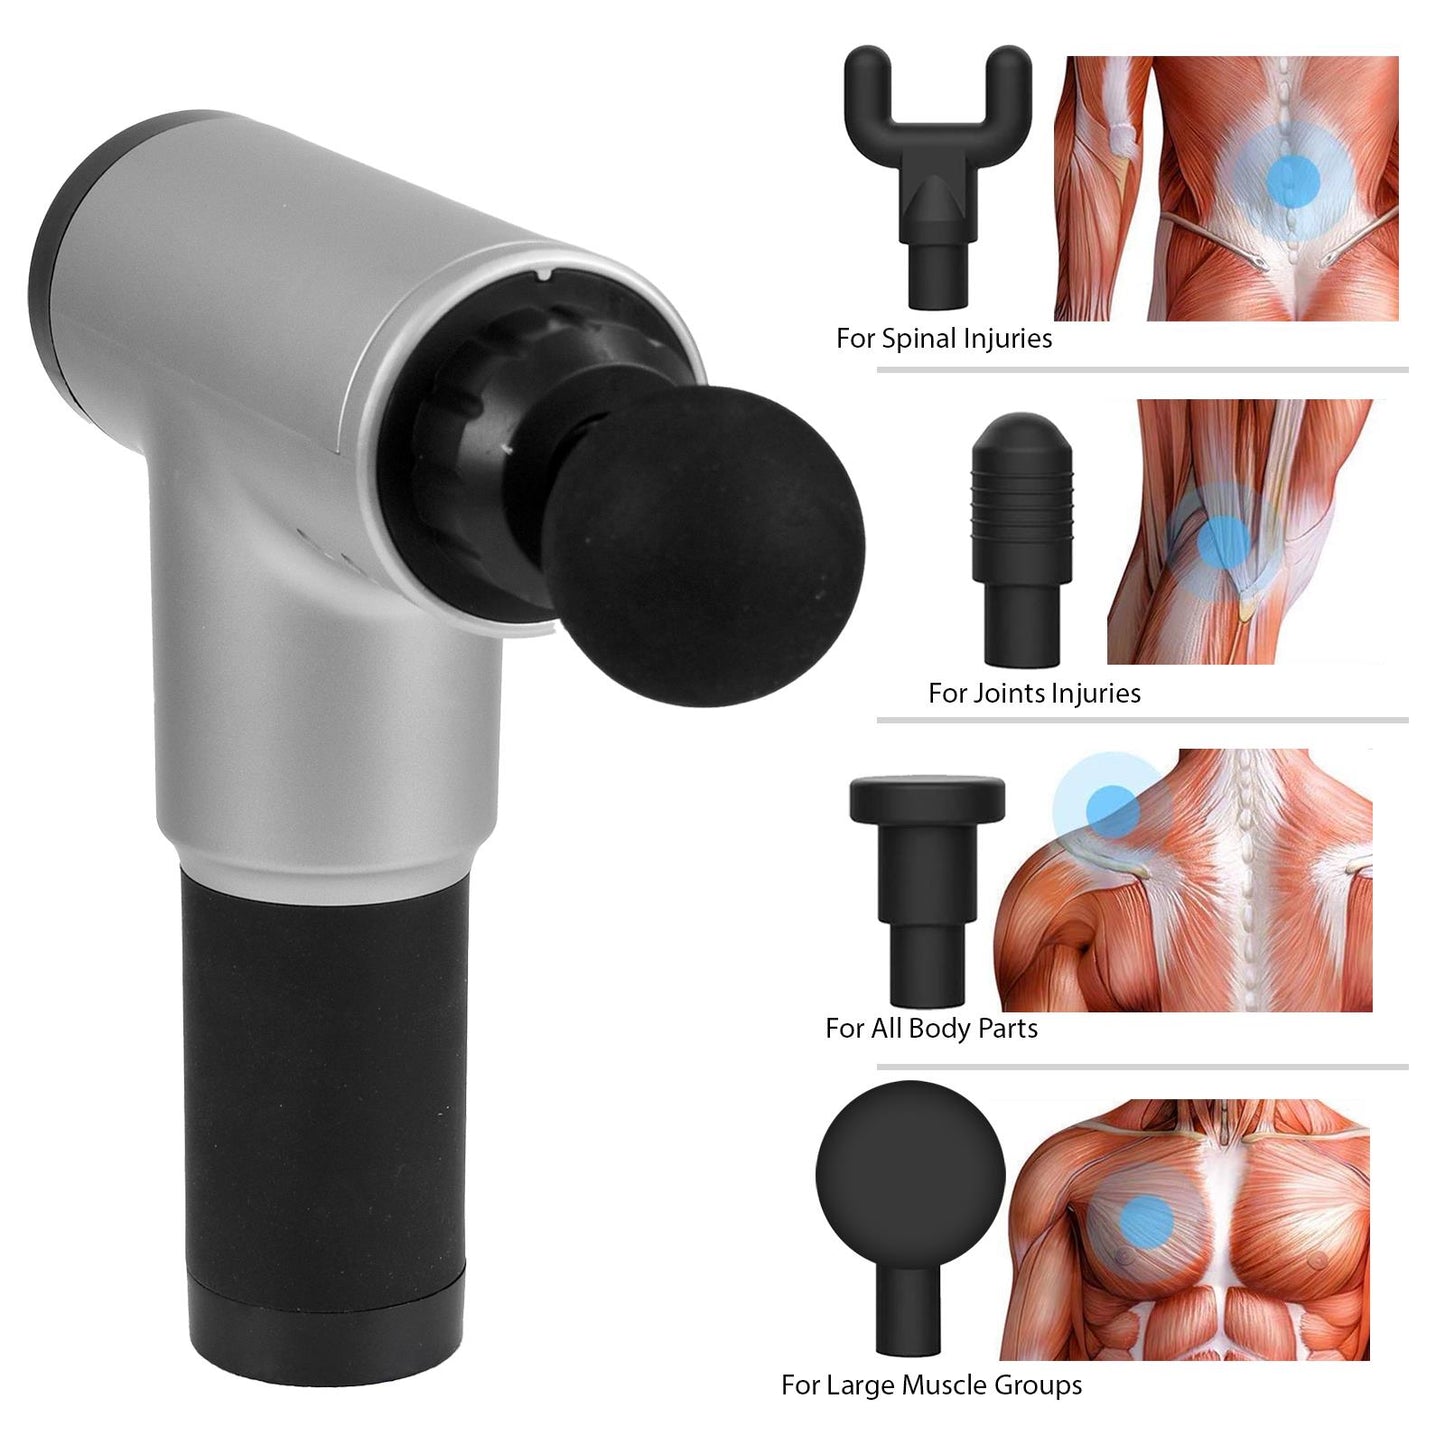 Soothe Aches And Pains With 4-Head Massage Gun